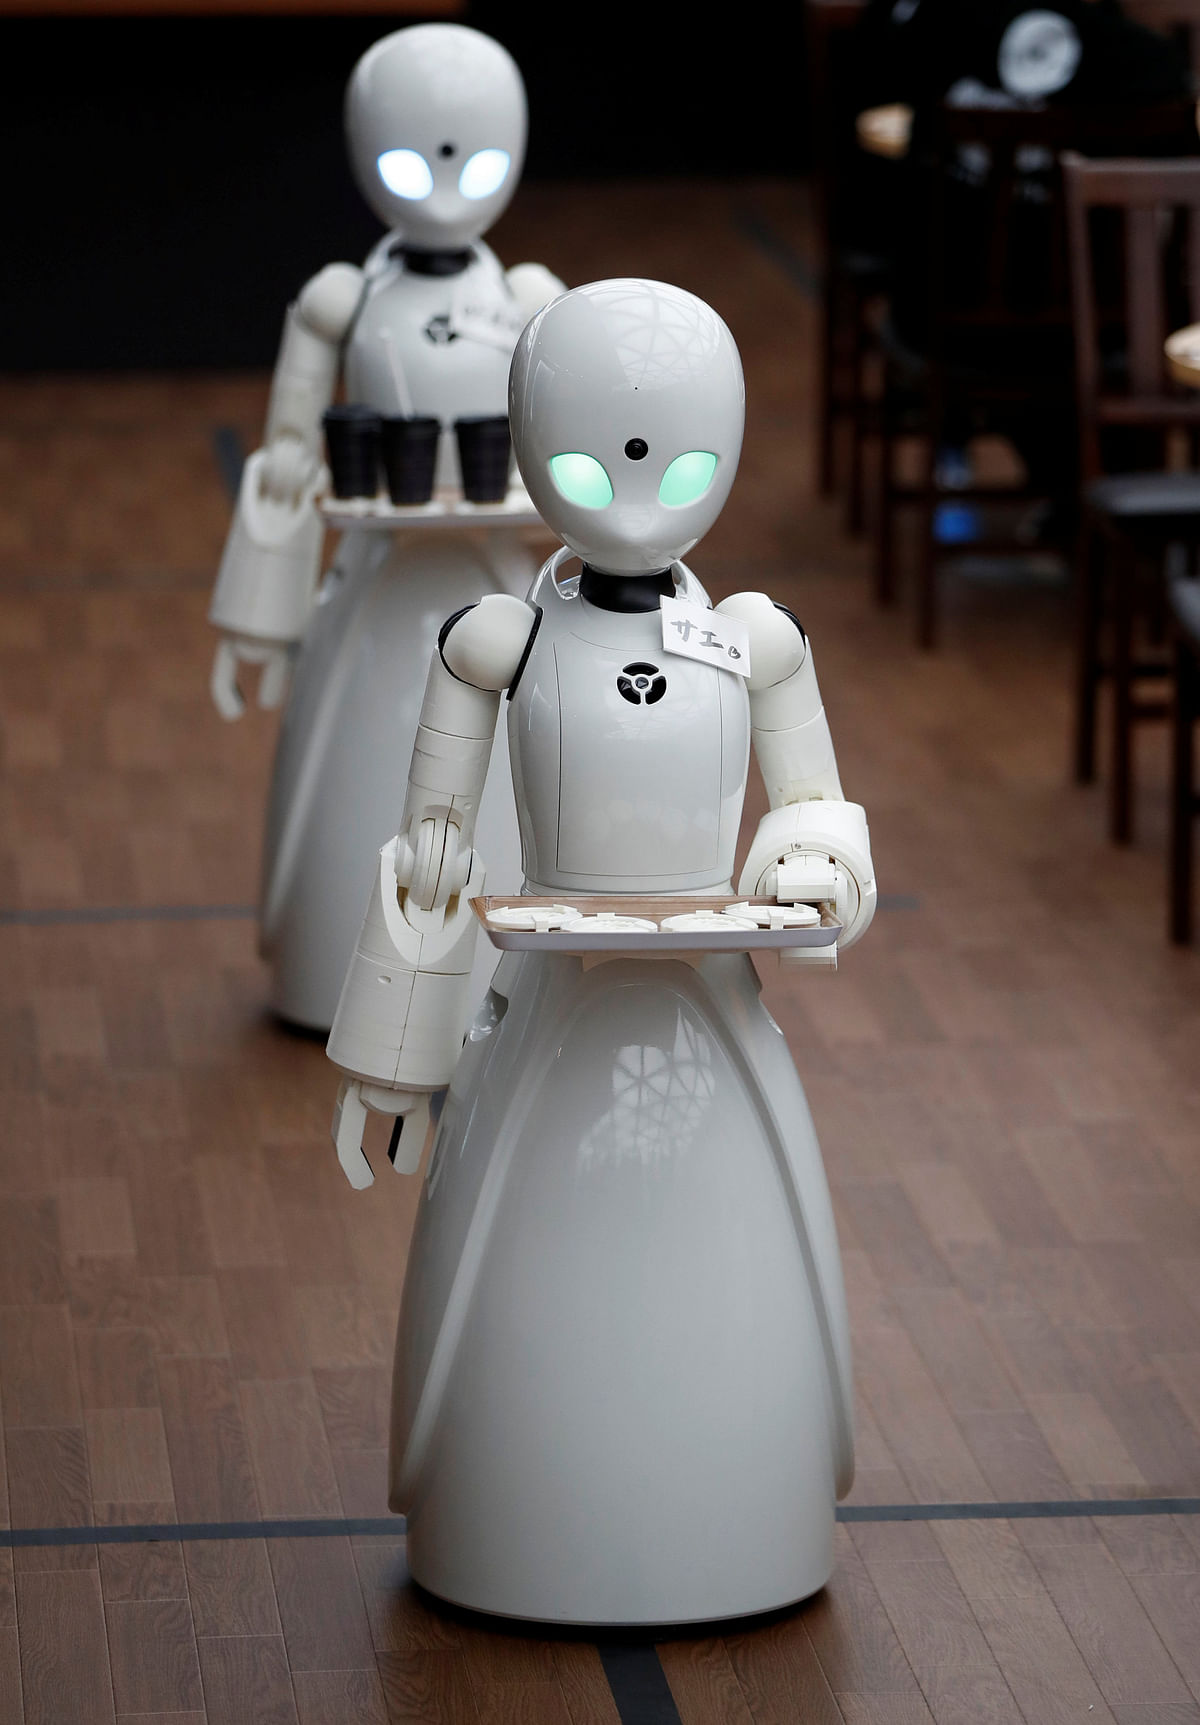 Remotely controlled robots OriHime-D, developed by Ory Lab Inc. to promote employment of disabled people, cuts a ribbon to celebrate the opening of a temporary cafe in Tokyo, Japan on 26 November 2018. Photo: Reuters